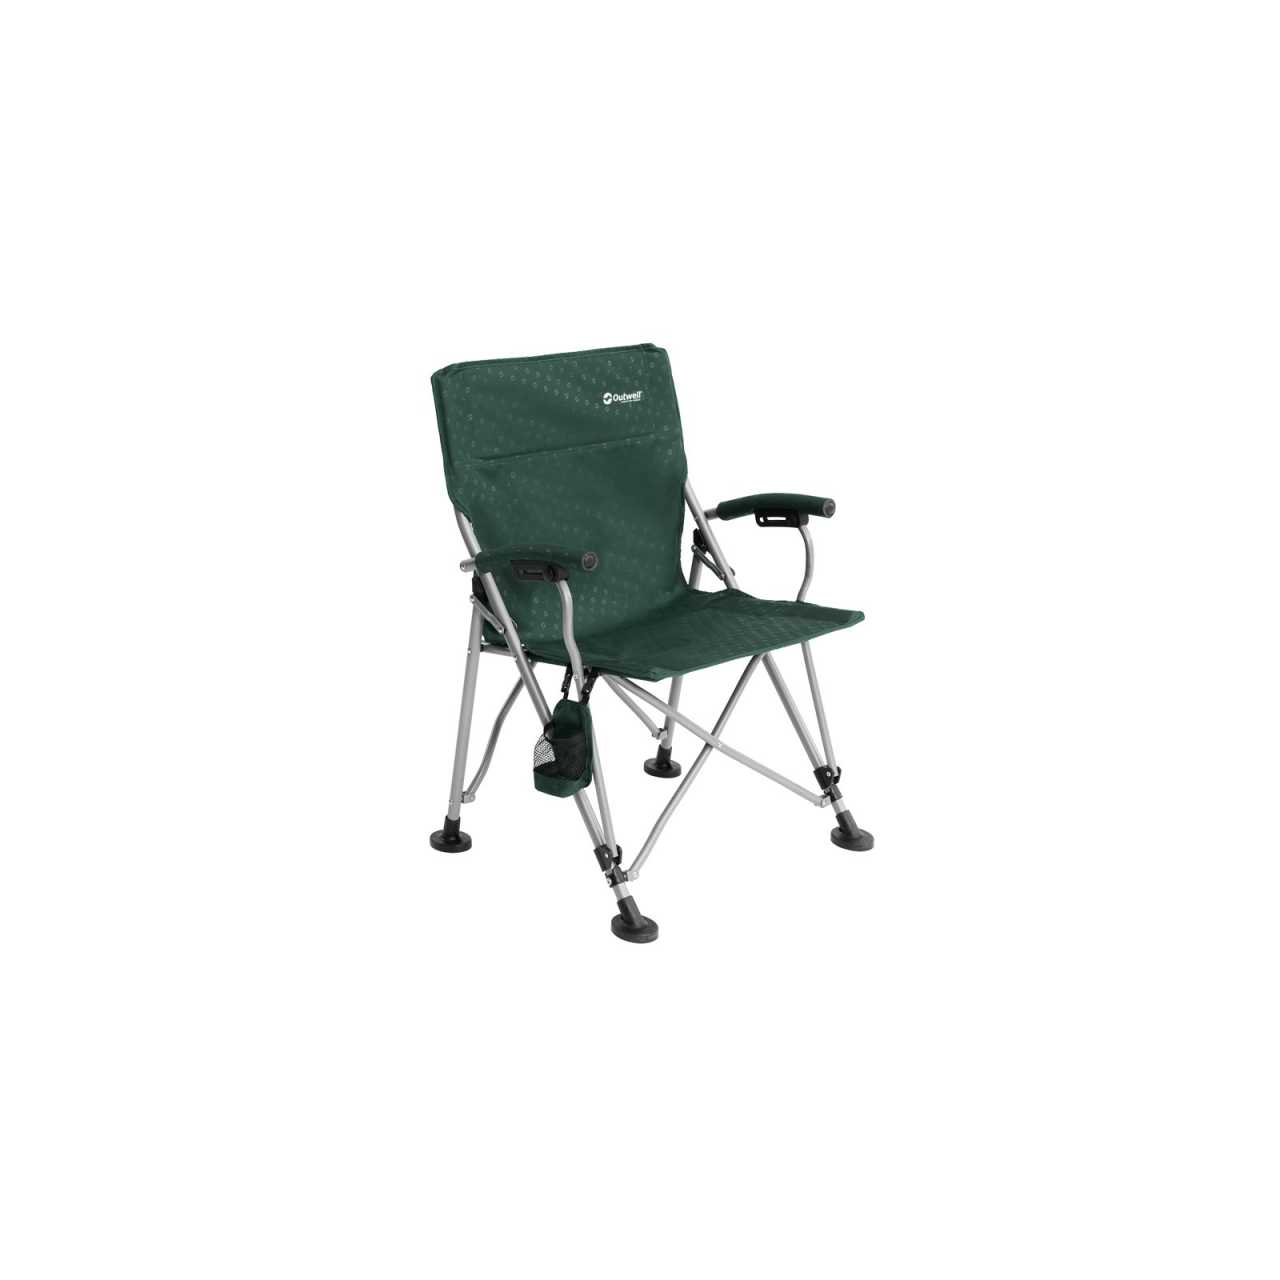 Outwell Campingstuhl Folding Furniture Campo Forest Green 470387